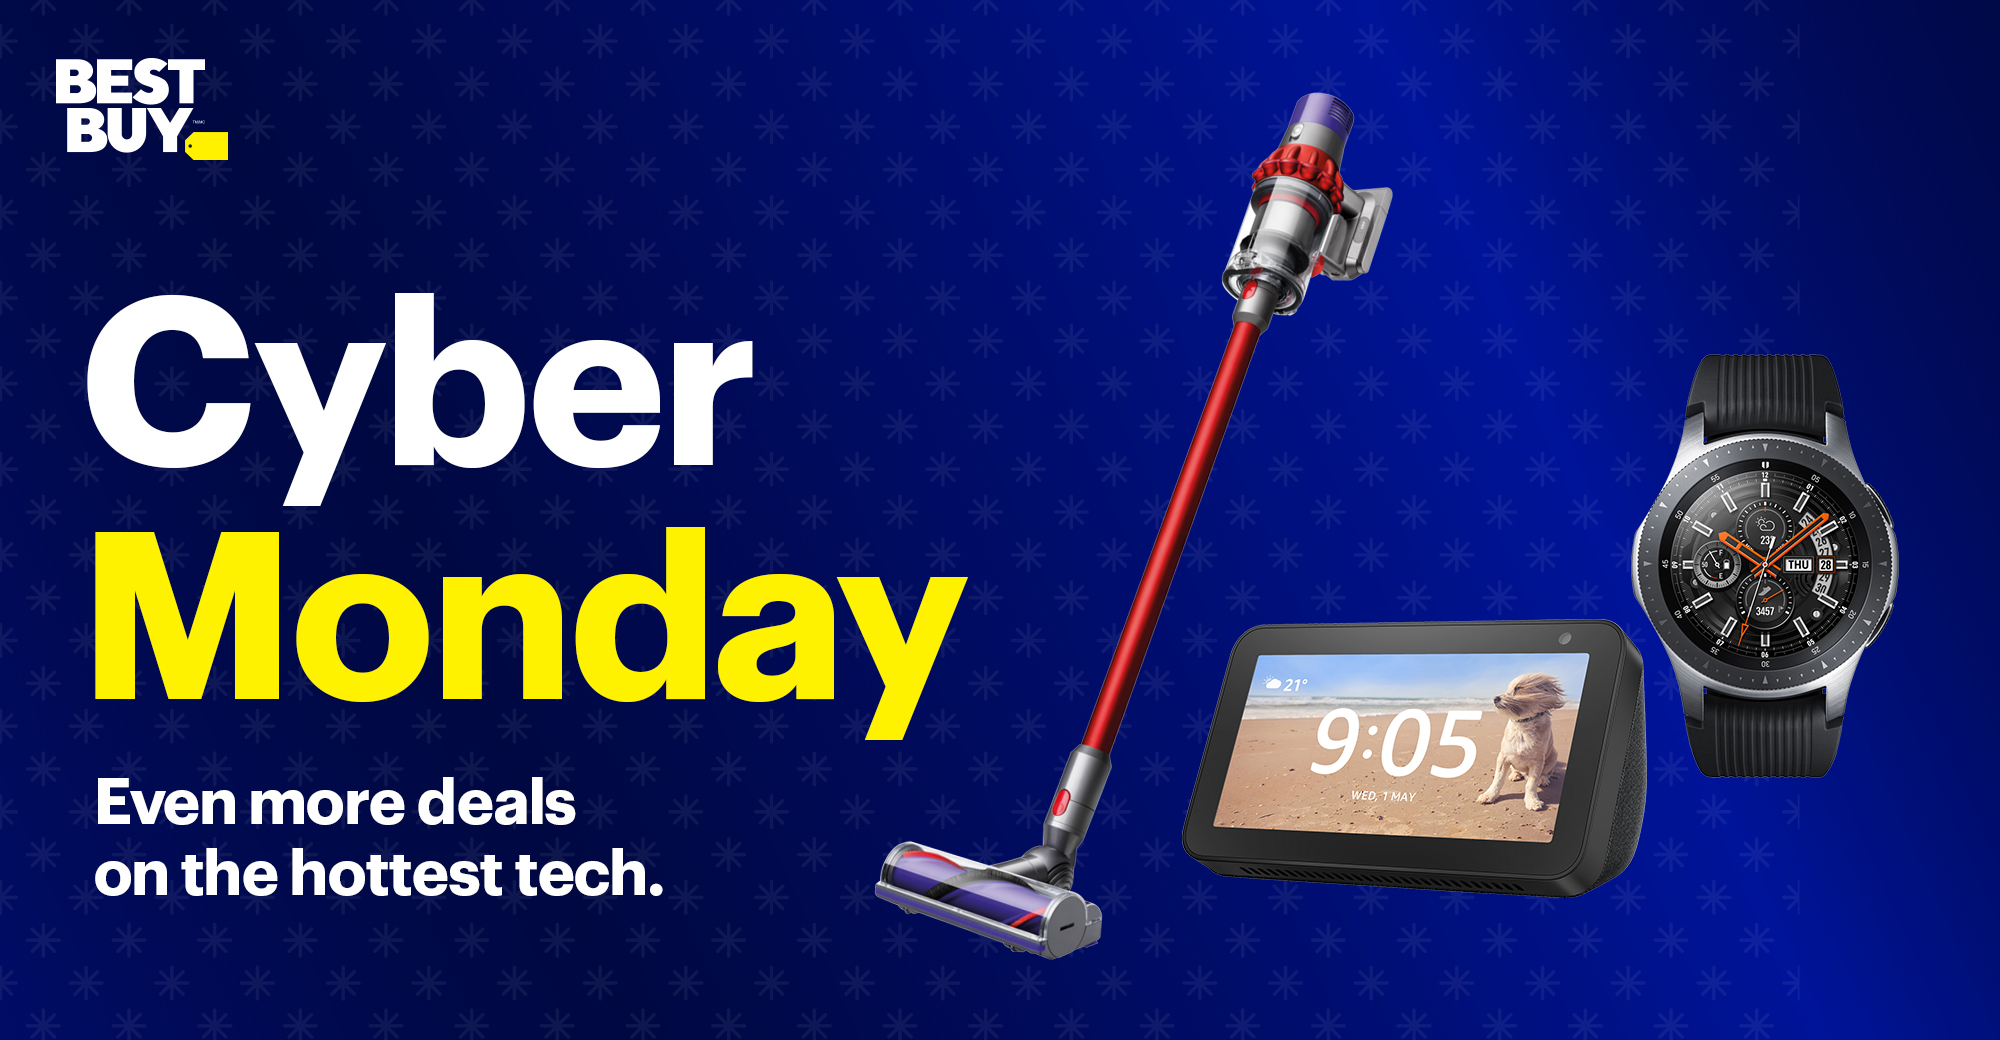 Best Buy Canada Cyber Monday Sale | Canadian Freebies, Coupons, Deals, Bargains, Flyers ...